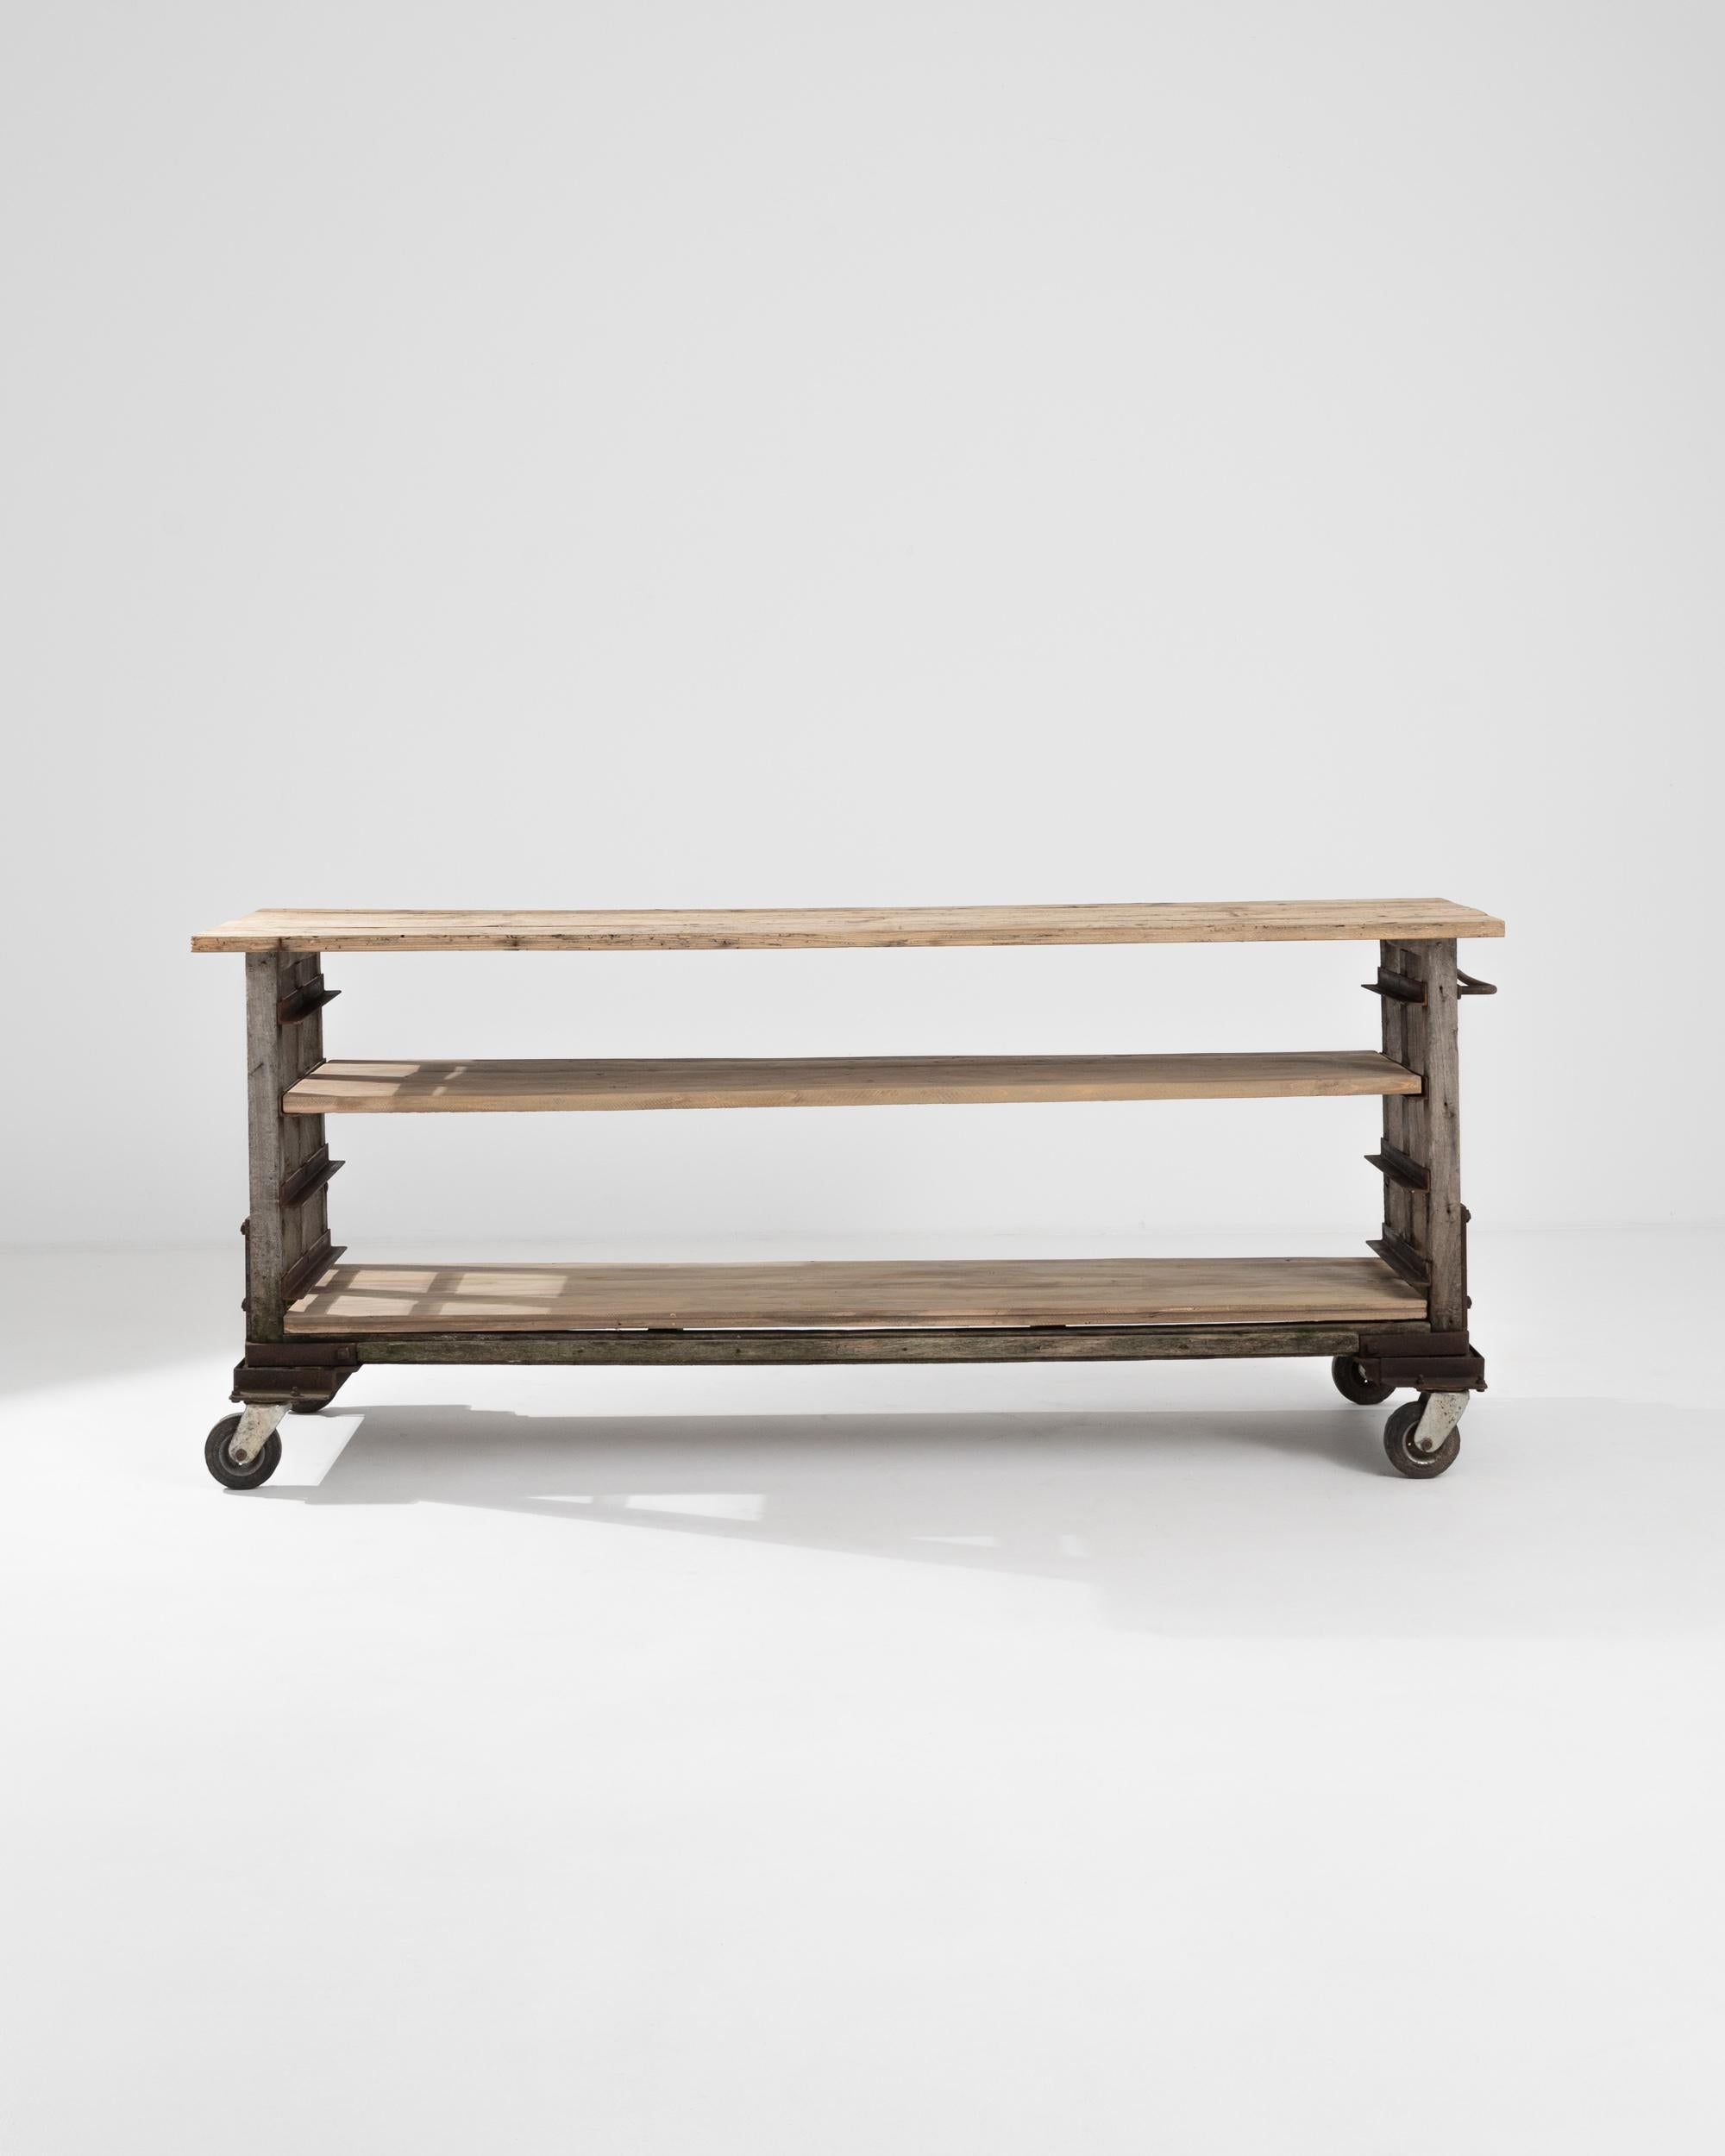 Weathered and robust, this antique Industrial cart makes a striking accent. Made in Belgium in the 1800s, this piece would have originally served a dedicated purpose in a workshop or factory. A wooden frame, reinforced with iron straps, sits upon a